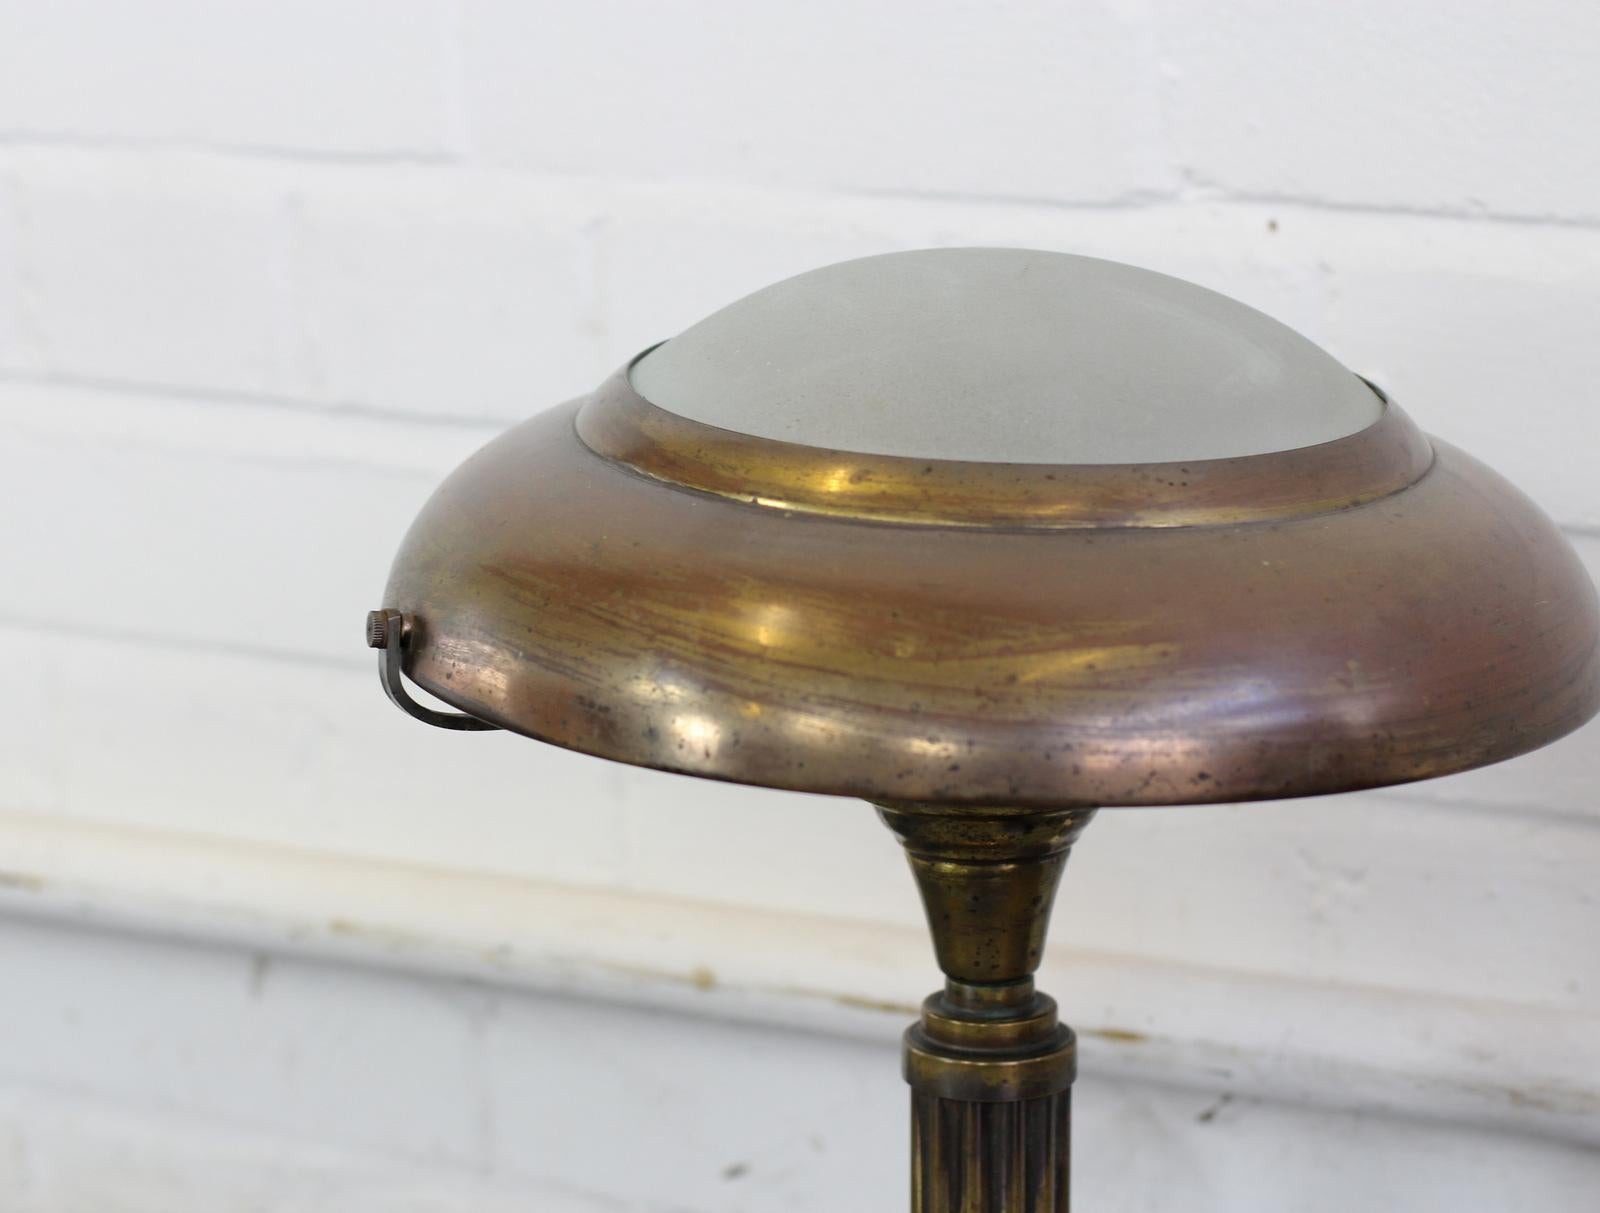 Early 20th century Italian brass table lamp, circa 1910

- Beautifully aged brass
- Etched domed glass
- Takes B22 bayonet bulbs
- Re wired with gold twisted cable
- Inline on/off switch on the base
- Italian, circa 1910
- Measures: 40 cm